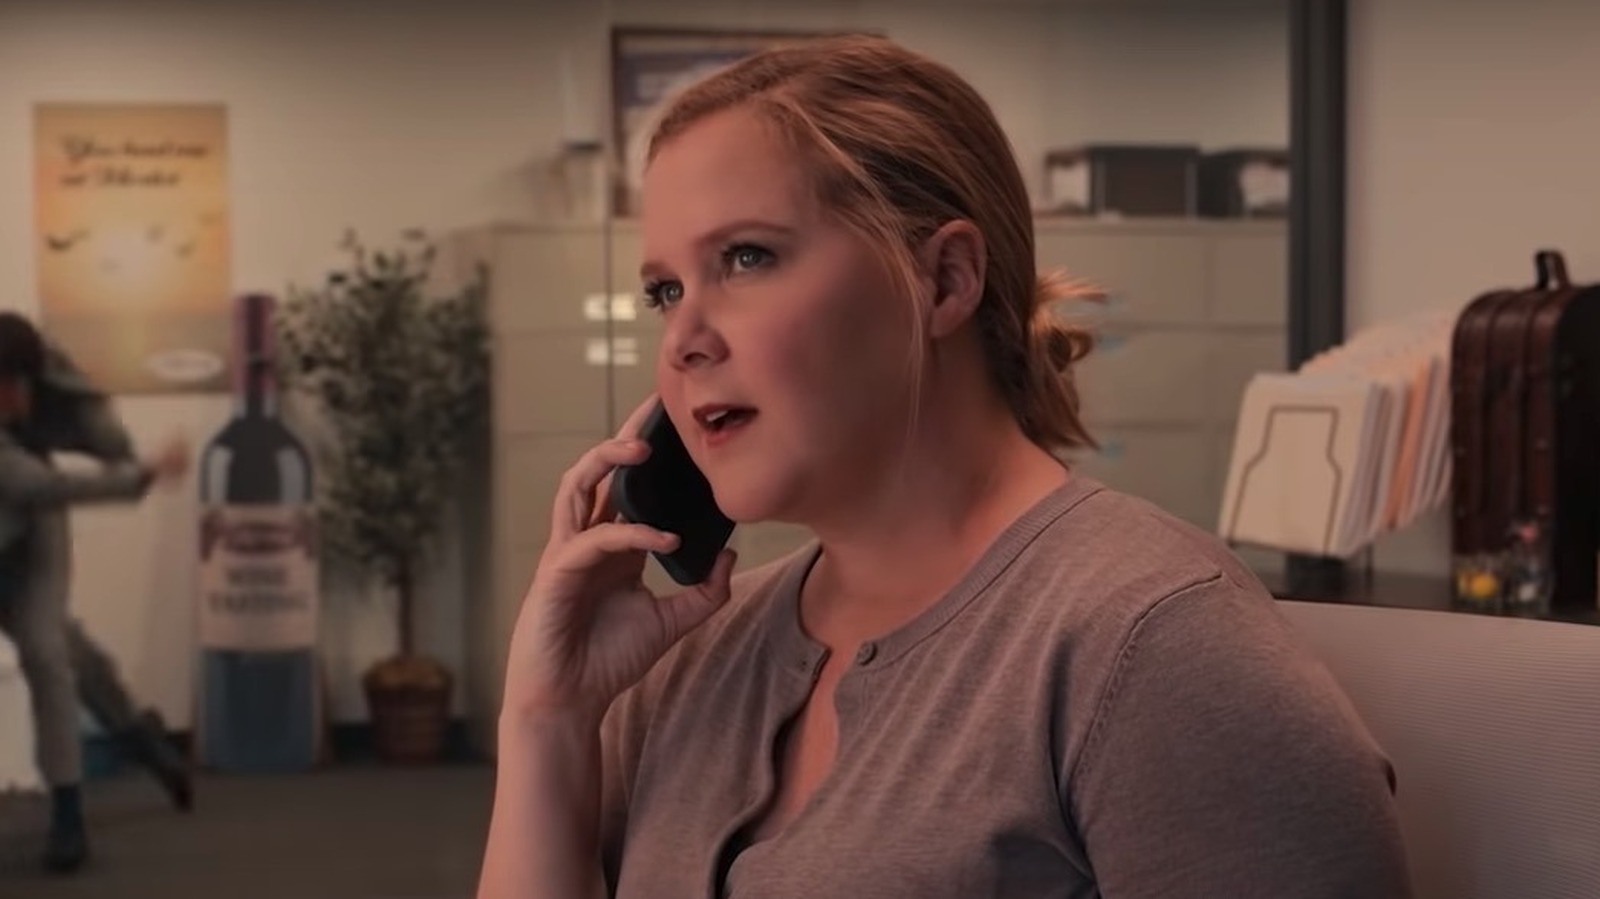 Watch the First Trailer for Amy Schumer's New TV Series Life & Beth